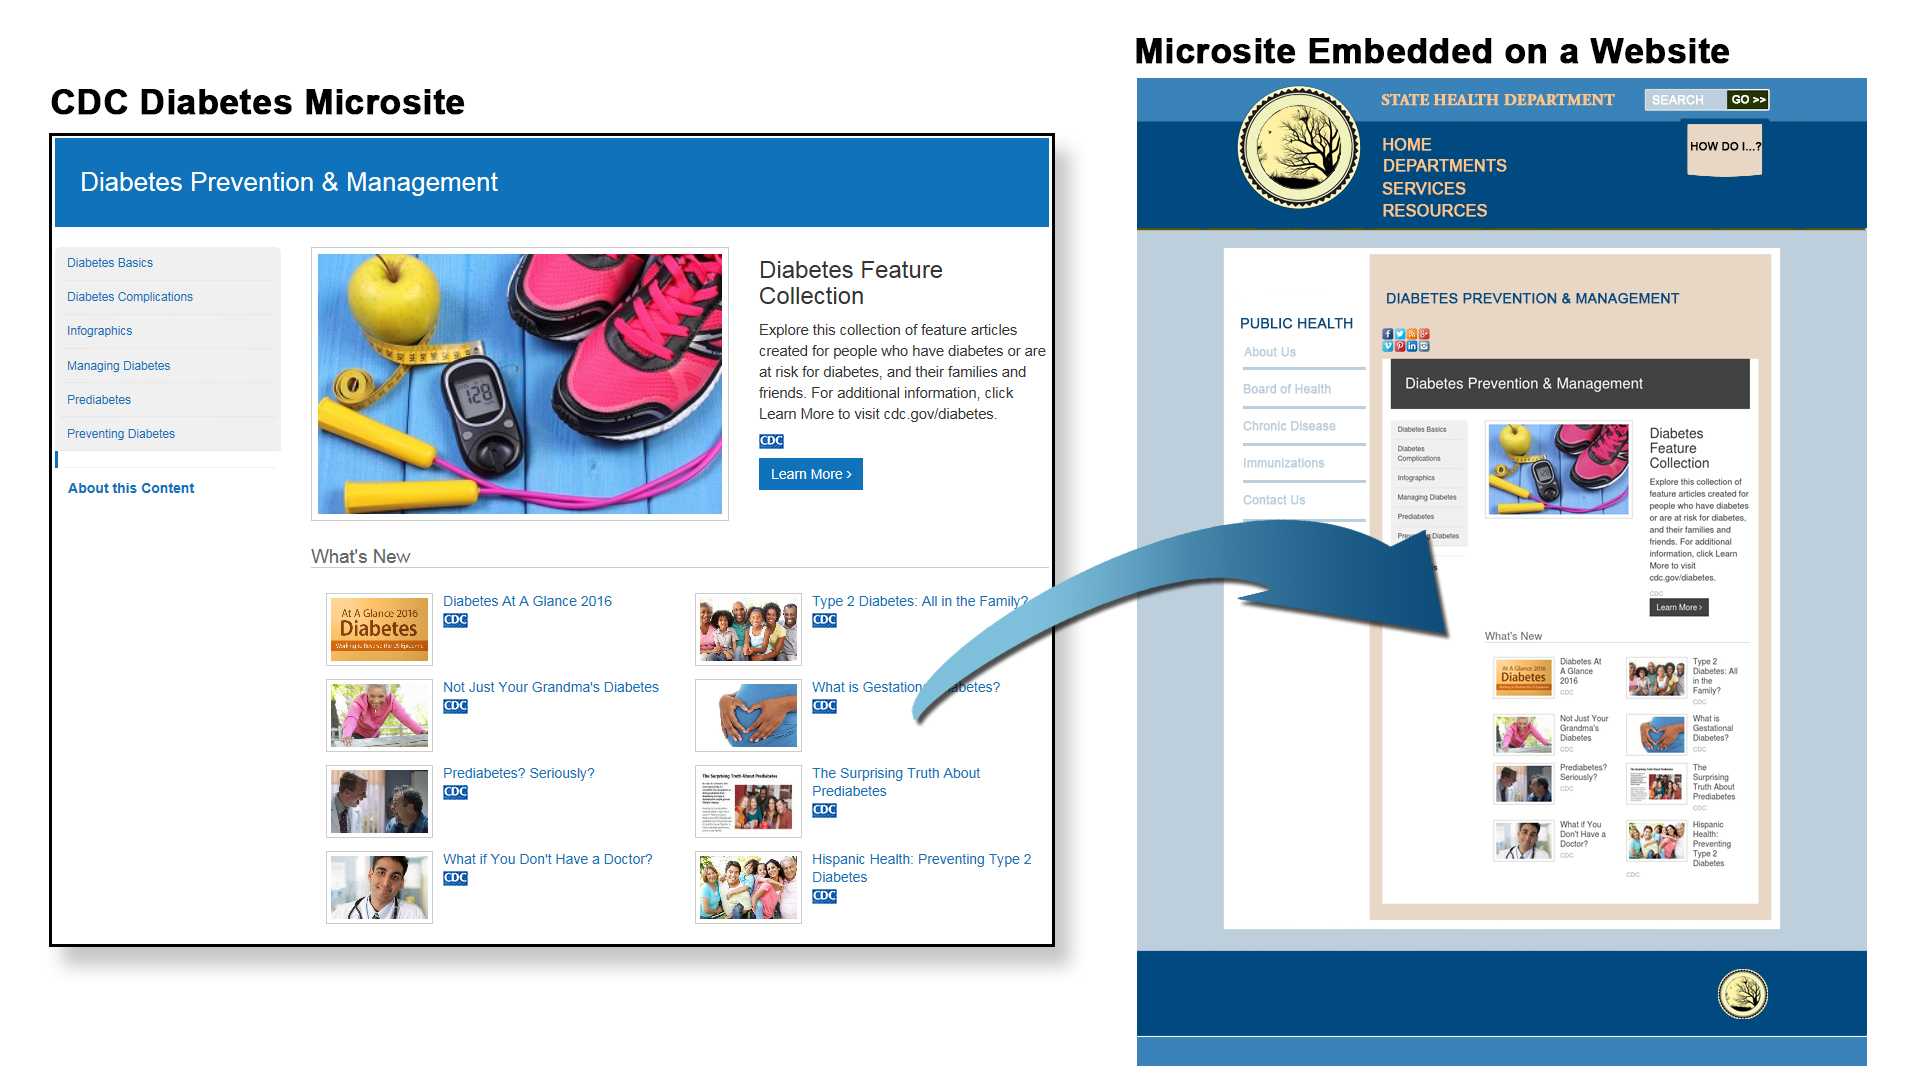 CDC Diabetes Microsite Embedded on a Website